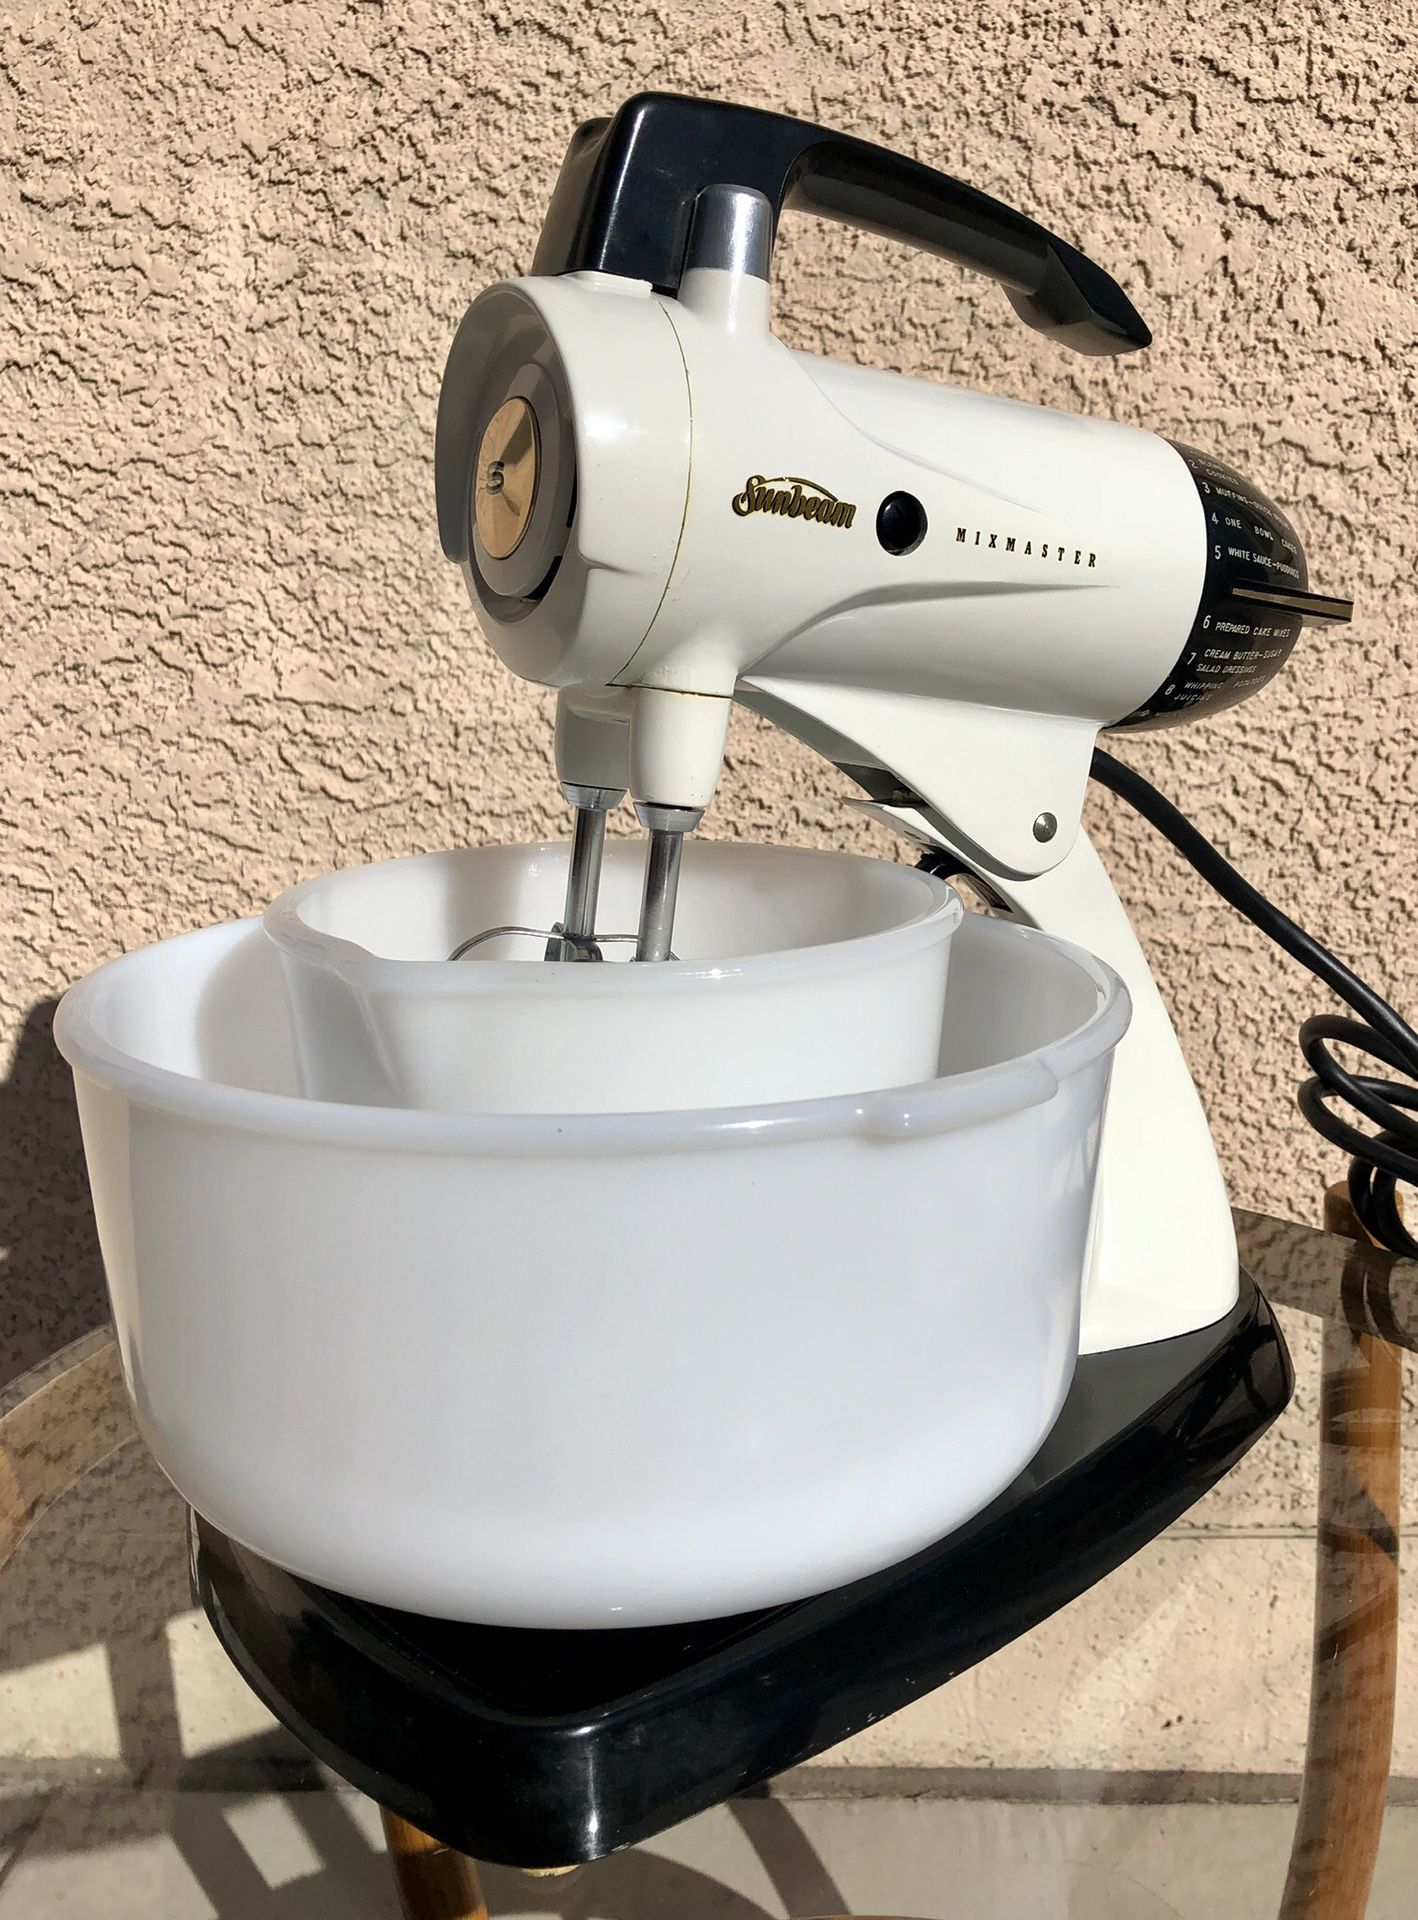 SUNBEAM Mixmaster 6 Speed Handheld Mixer w/Burst Model 2486 w/7 Attachments,  Vintage, Made in Mexico for Sale in Hartford, CT - OfferUp